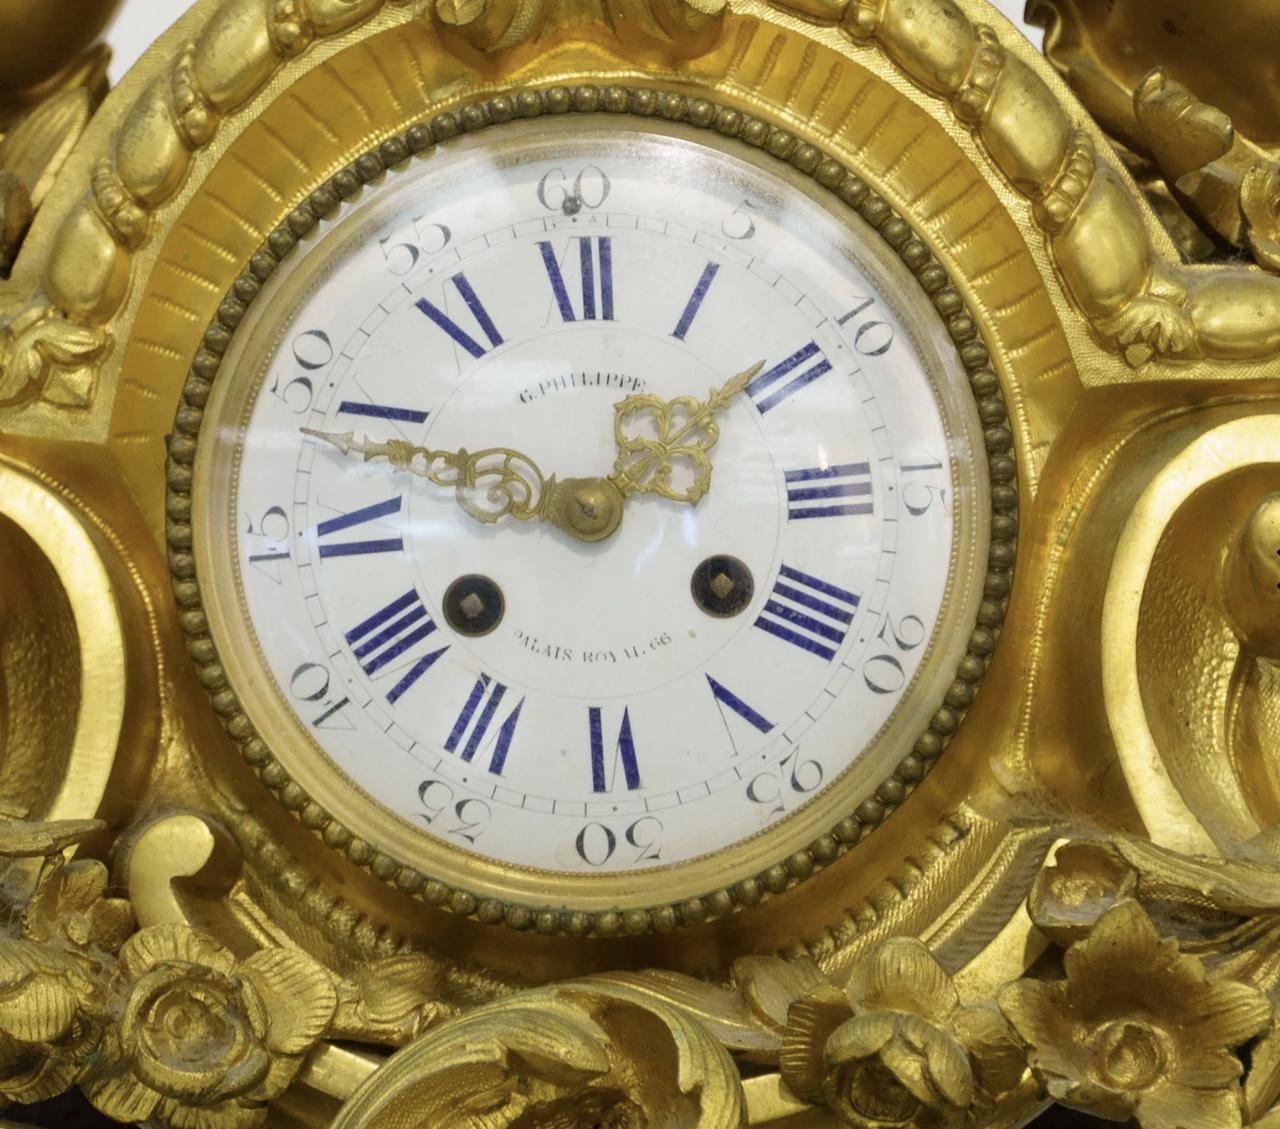 An ornate rocaille scrolled base with garland swags, centered the enamel white clock face with Roman and Arabic Numerals, the face with, G. Philippe, Palais Royal 66, flanked by two putto's holding a urn filled with flowers,

the mechanism stamped